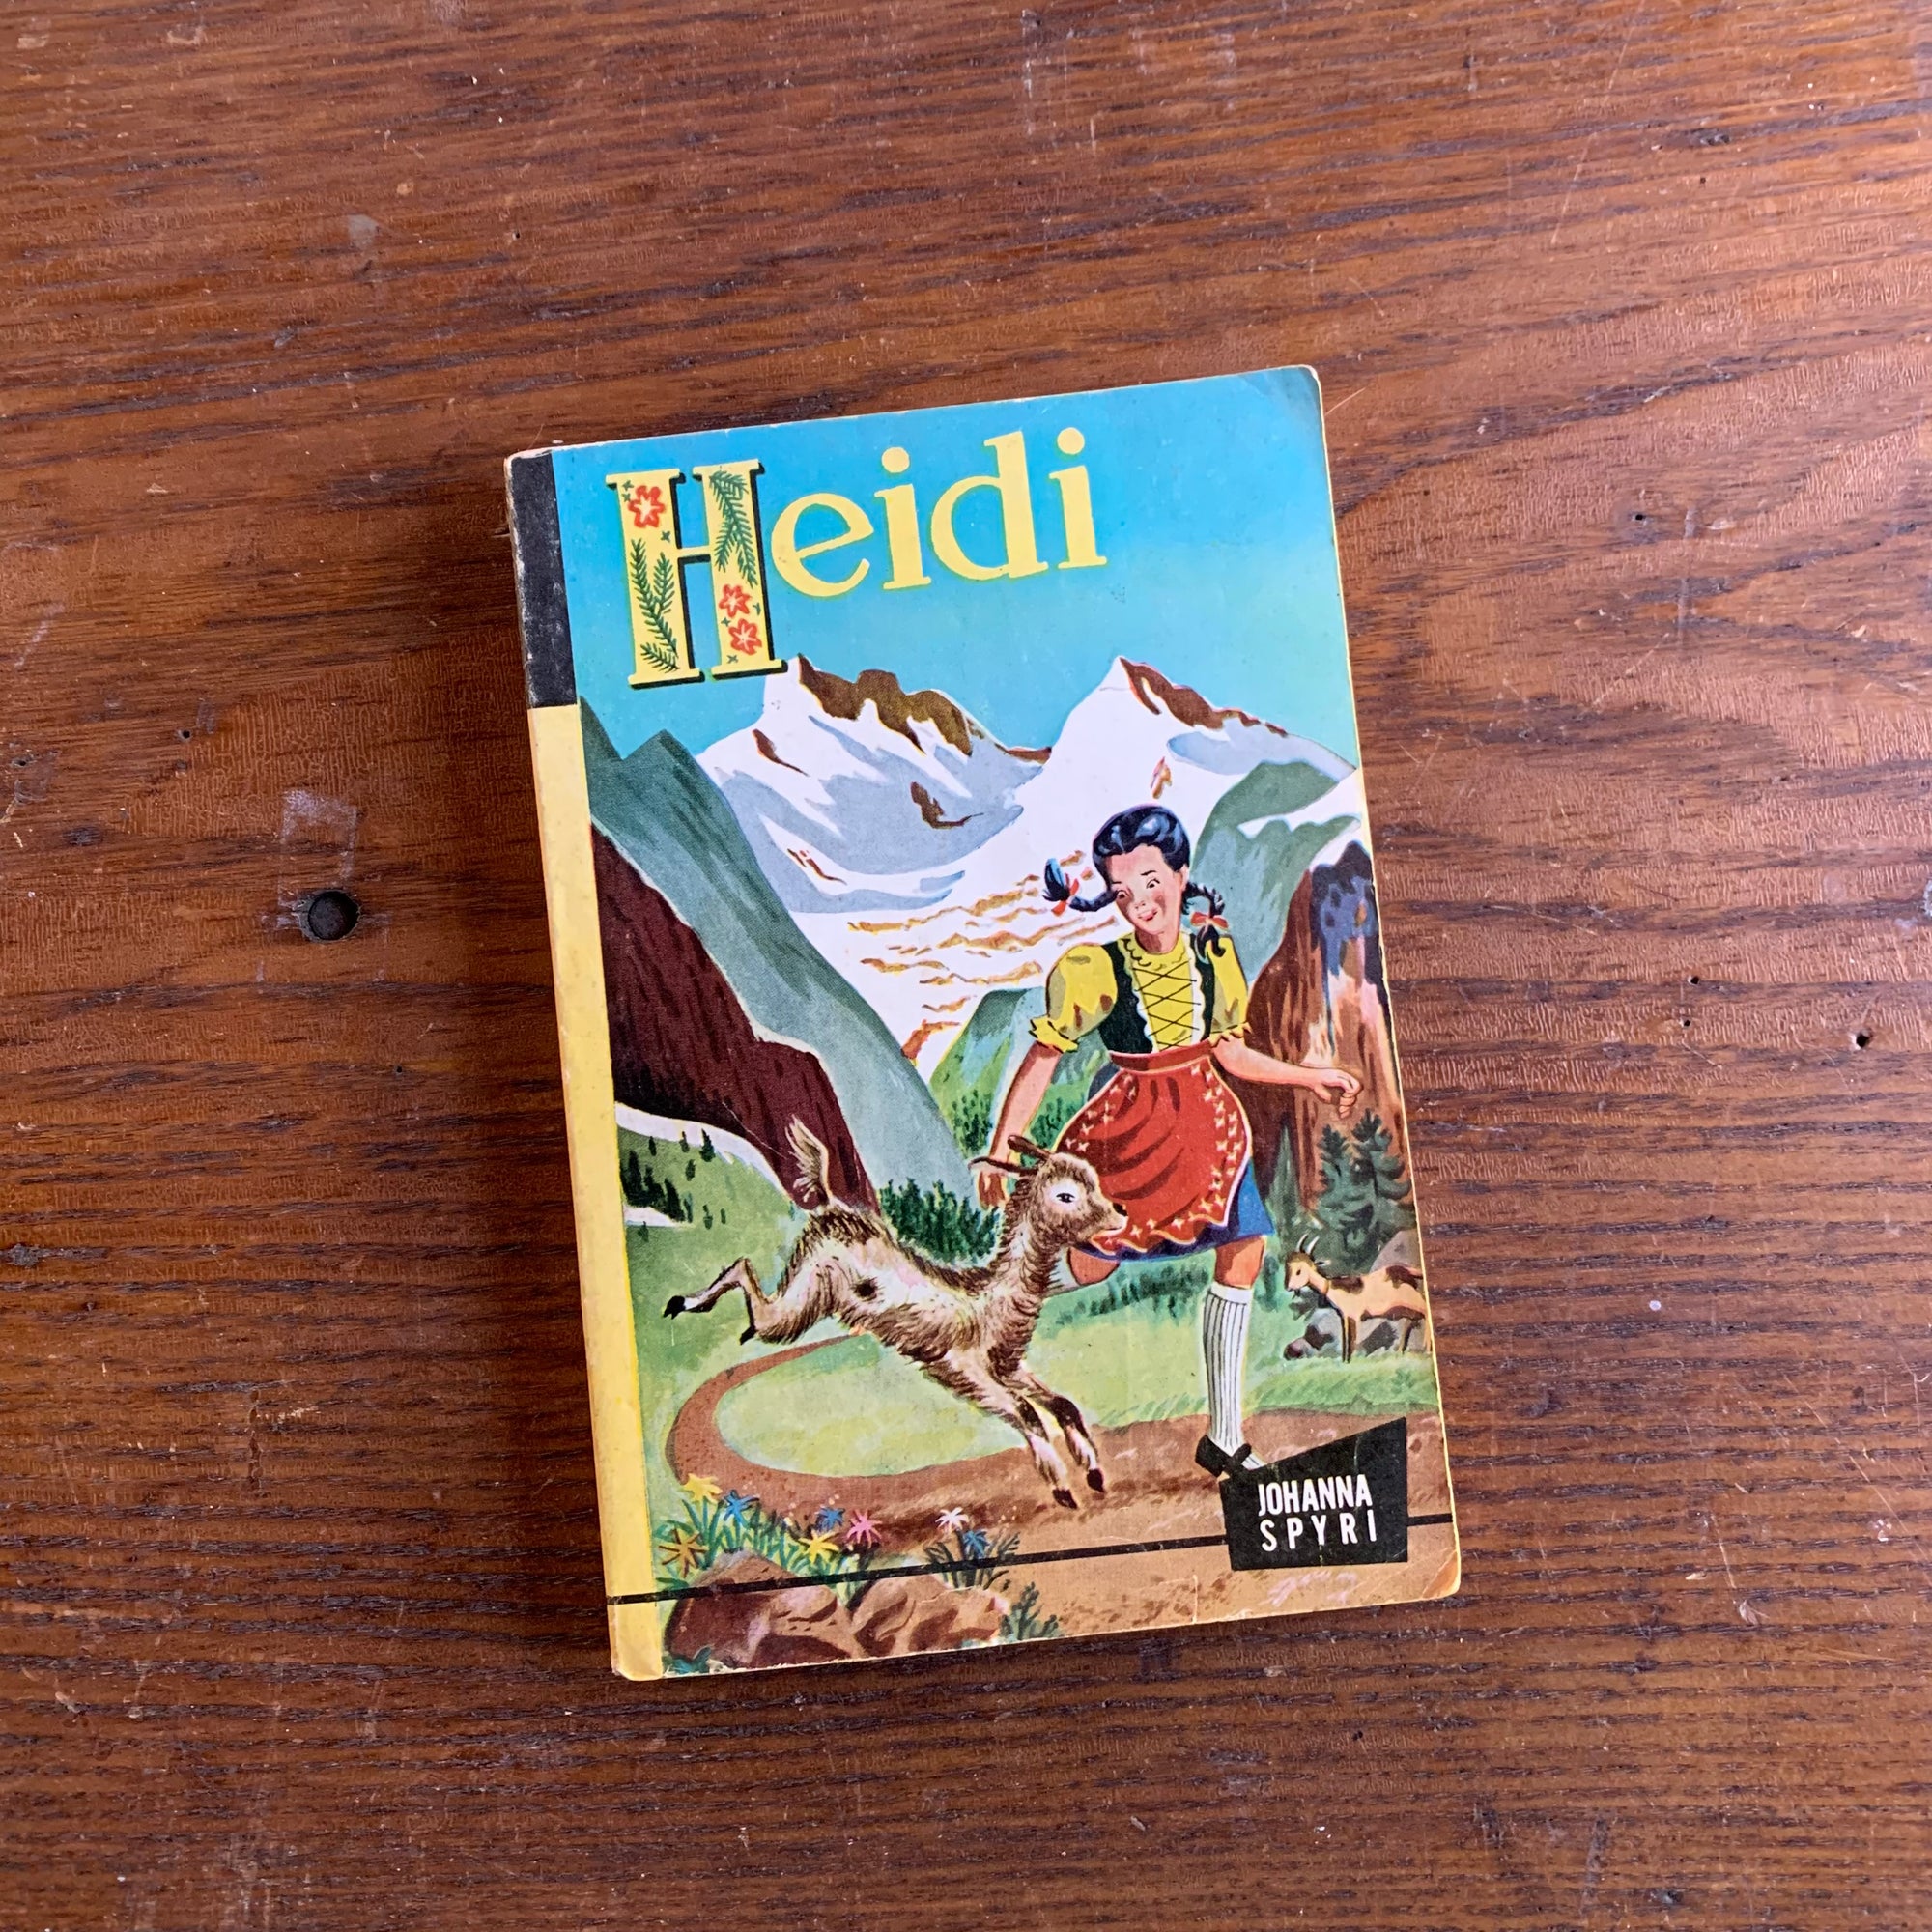 Heidi by Johanna Spyri - A Giant Junior Classic Paperback Edition Published by Spring Books, Inc. for Playmore, Inc.